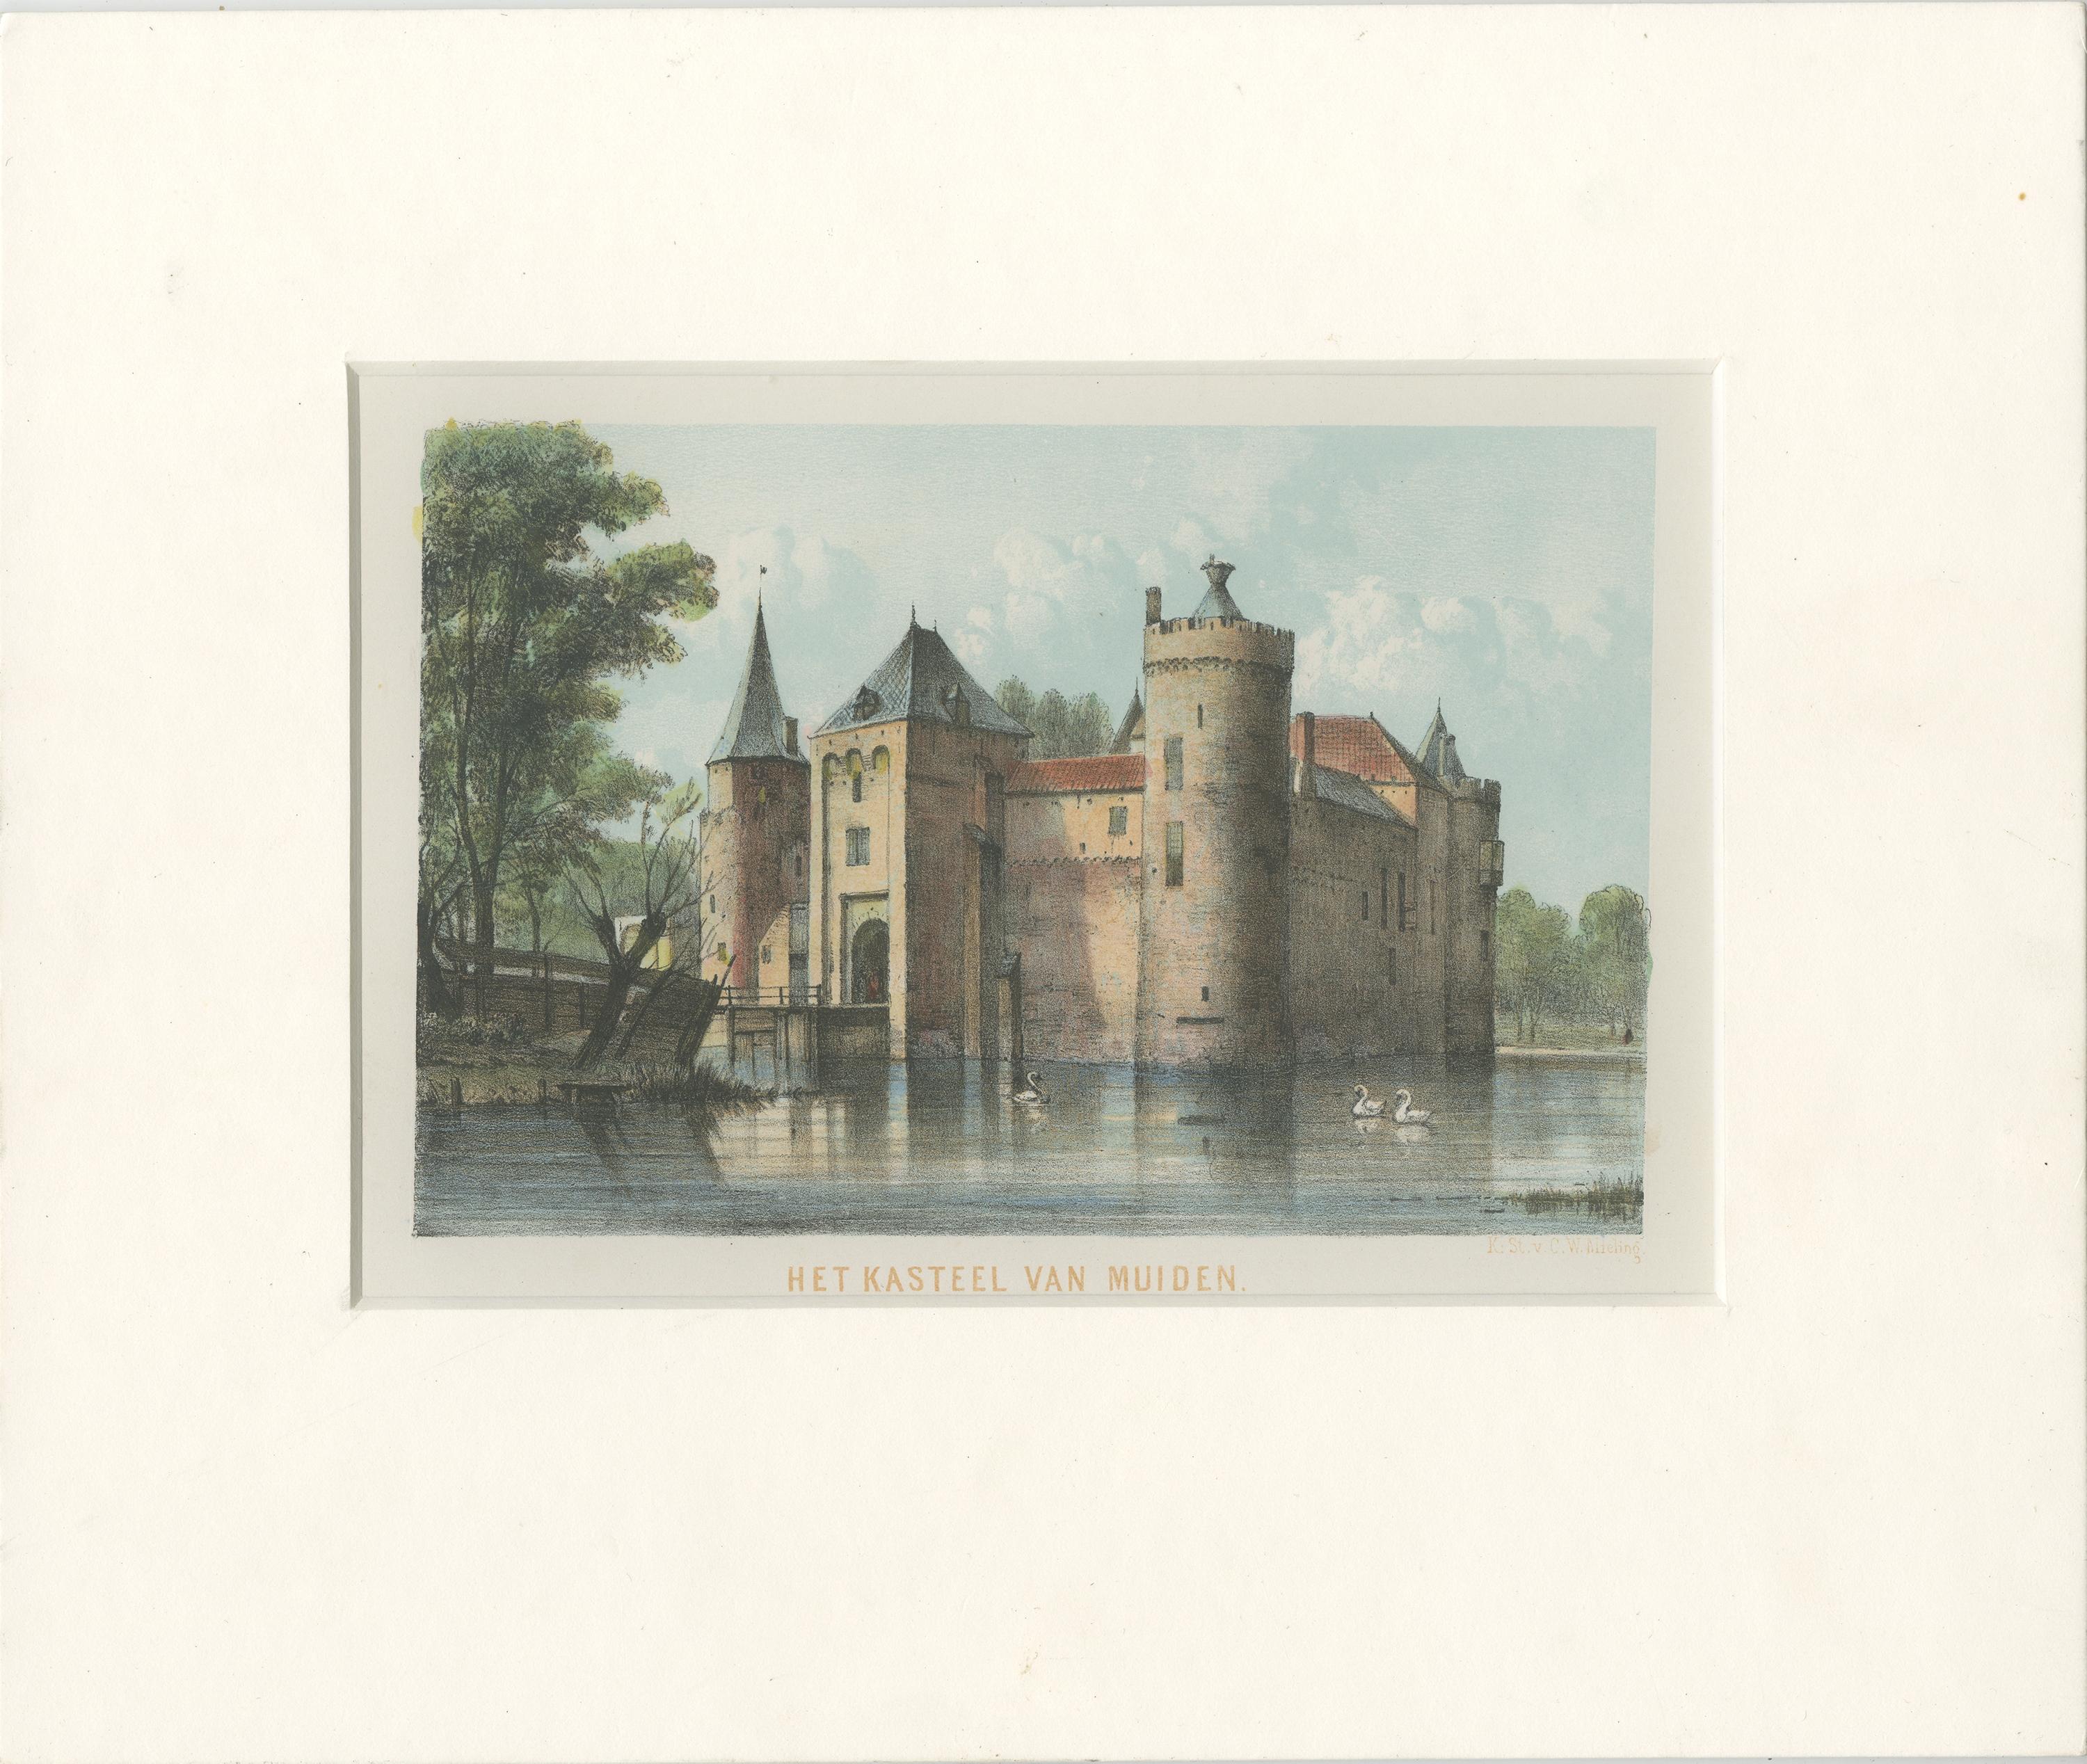 Antique print titled 'Het Kasteel van Muiden'. View of Muiden Castle, the Netherlands. Published circa 1895.

Artists and Engravers: Published by C.W. Mieling.

Condition: Very good, passe-partout/matting included. Please study image carefully.